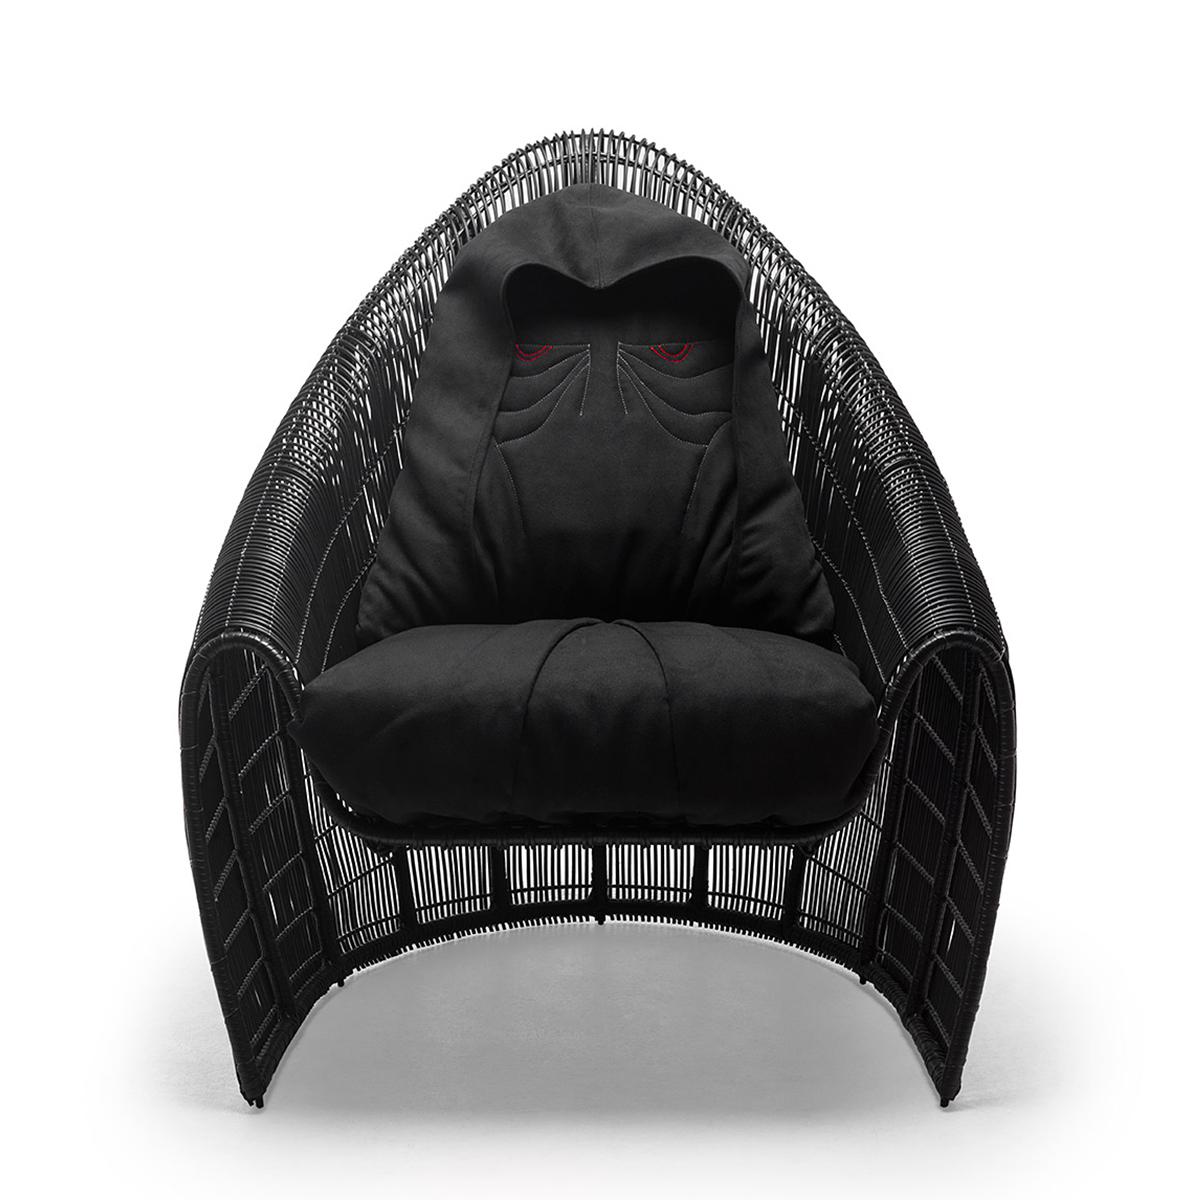 Armchair Palpatine in black finish with structure in
steel and with hand-braided nylon and polyethylene.
With black cushion seat.
Lead time production if on stock 2-3 weeks,
if not on stock 15-16 weeks.